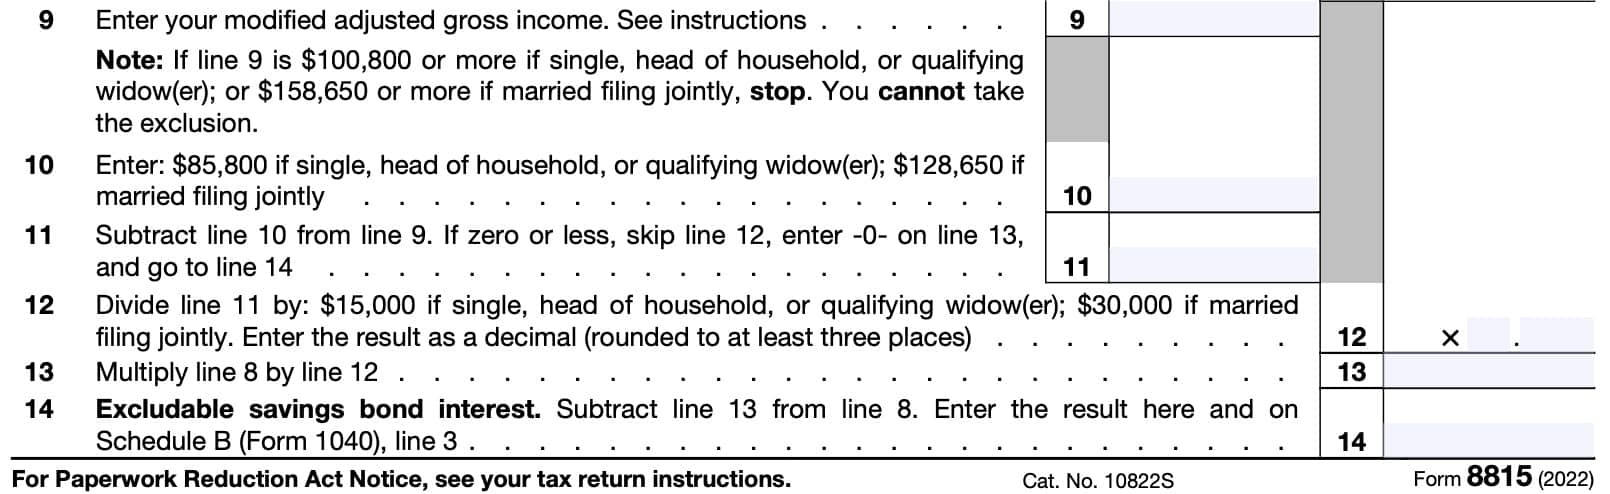 irs form 8815, lines 9-14